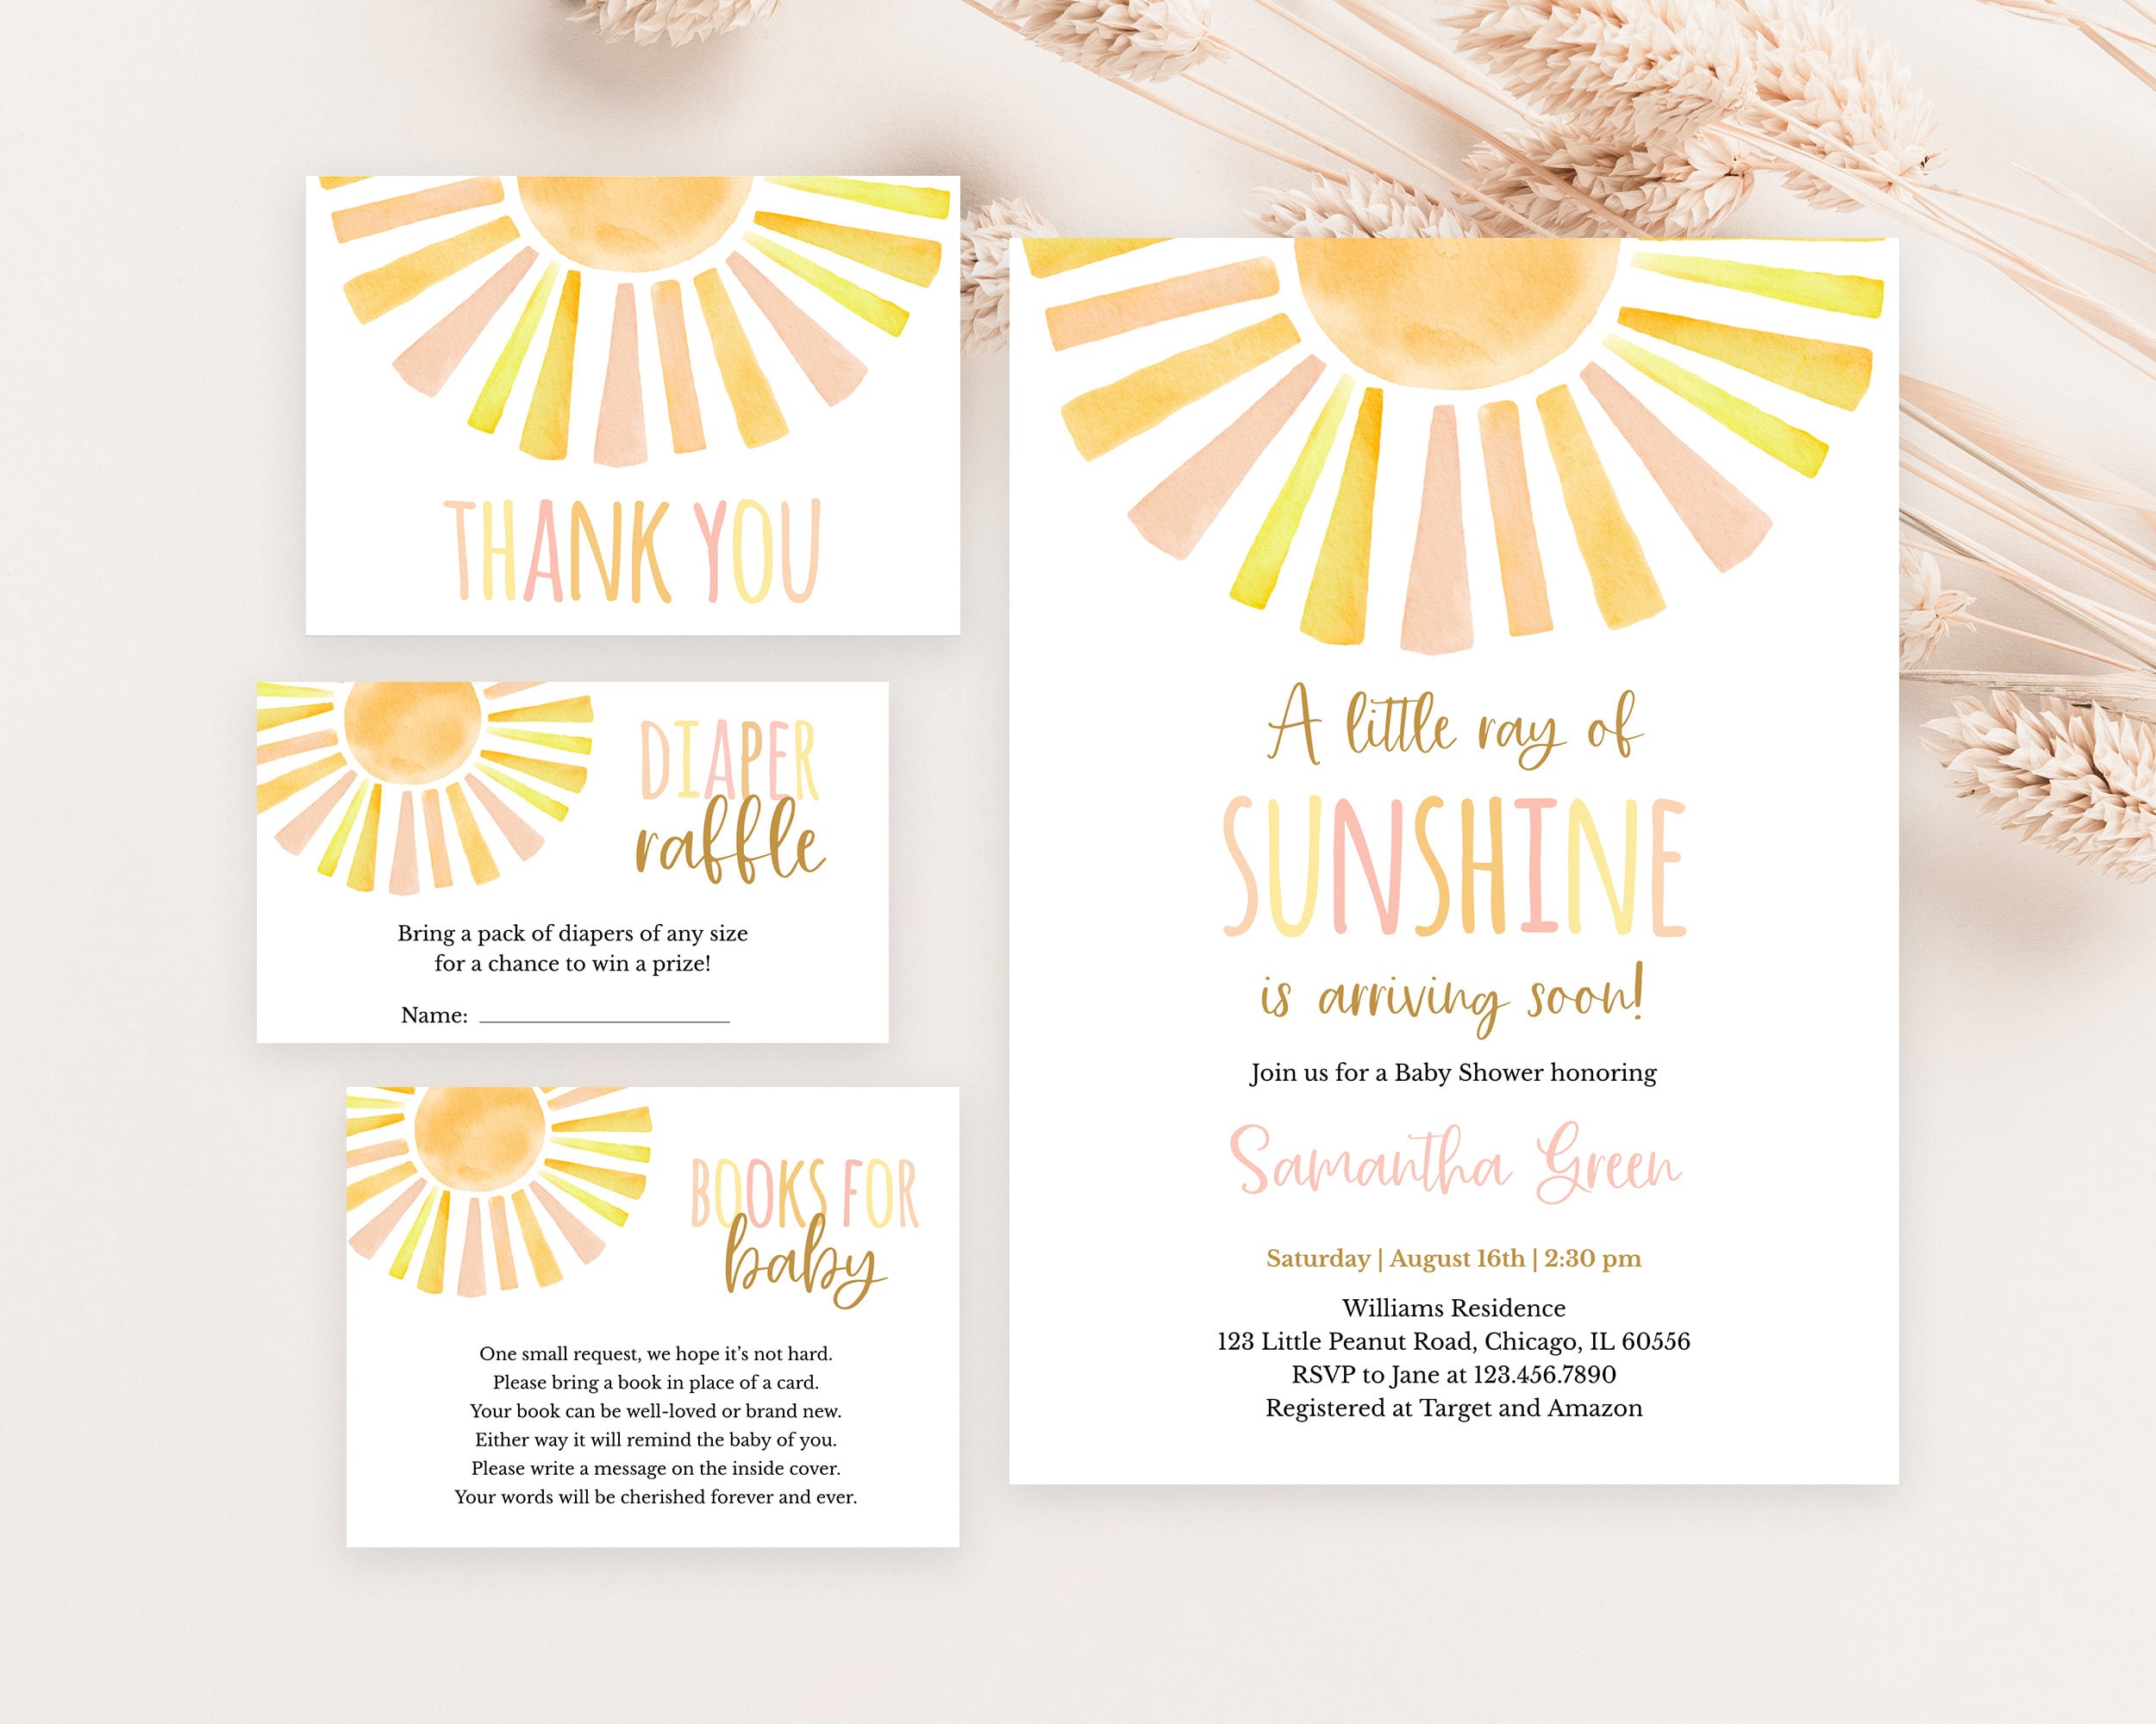 You Are My Sunshine Book Request, You Are My Sunshine Baby Shower